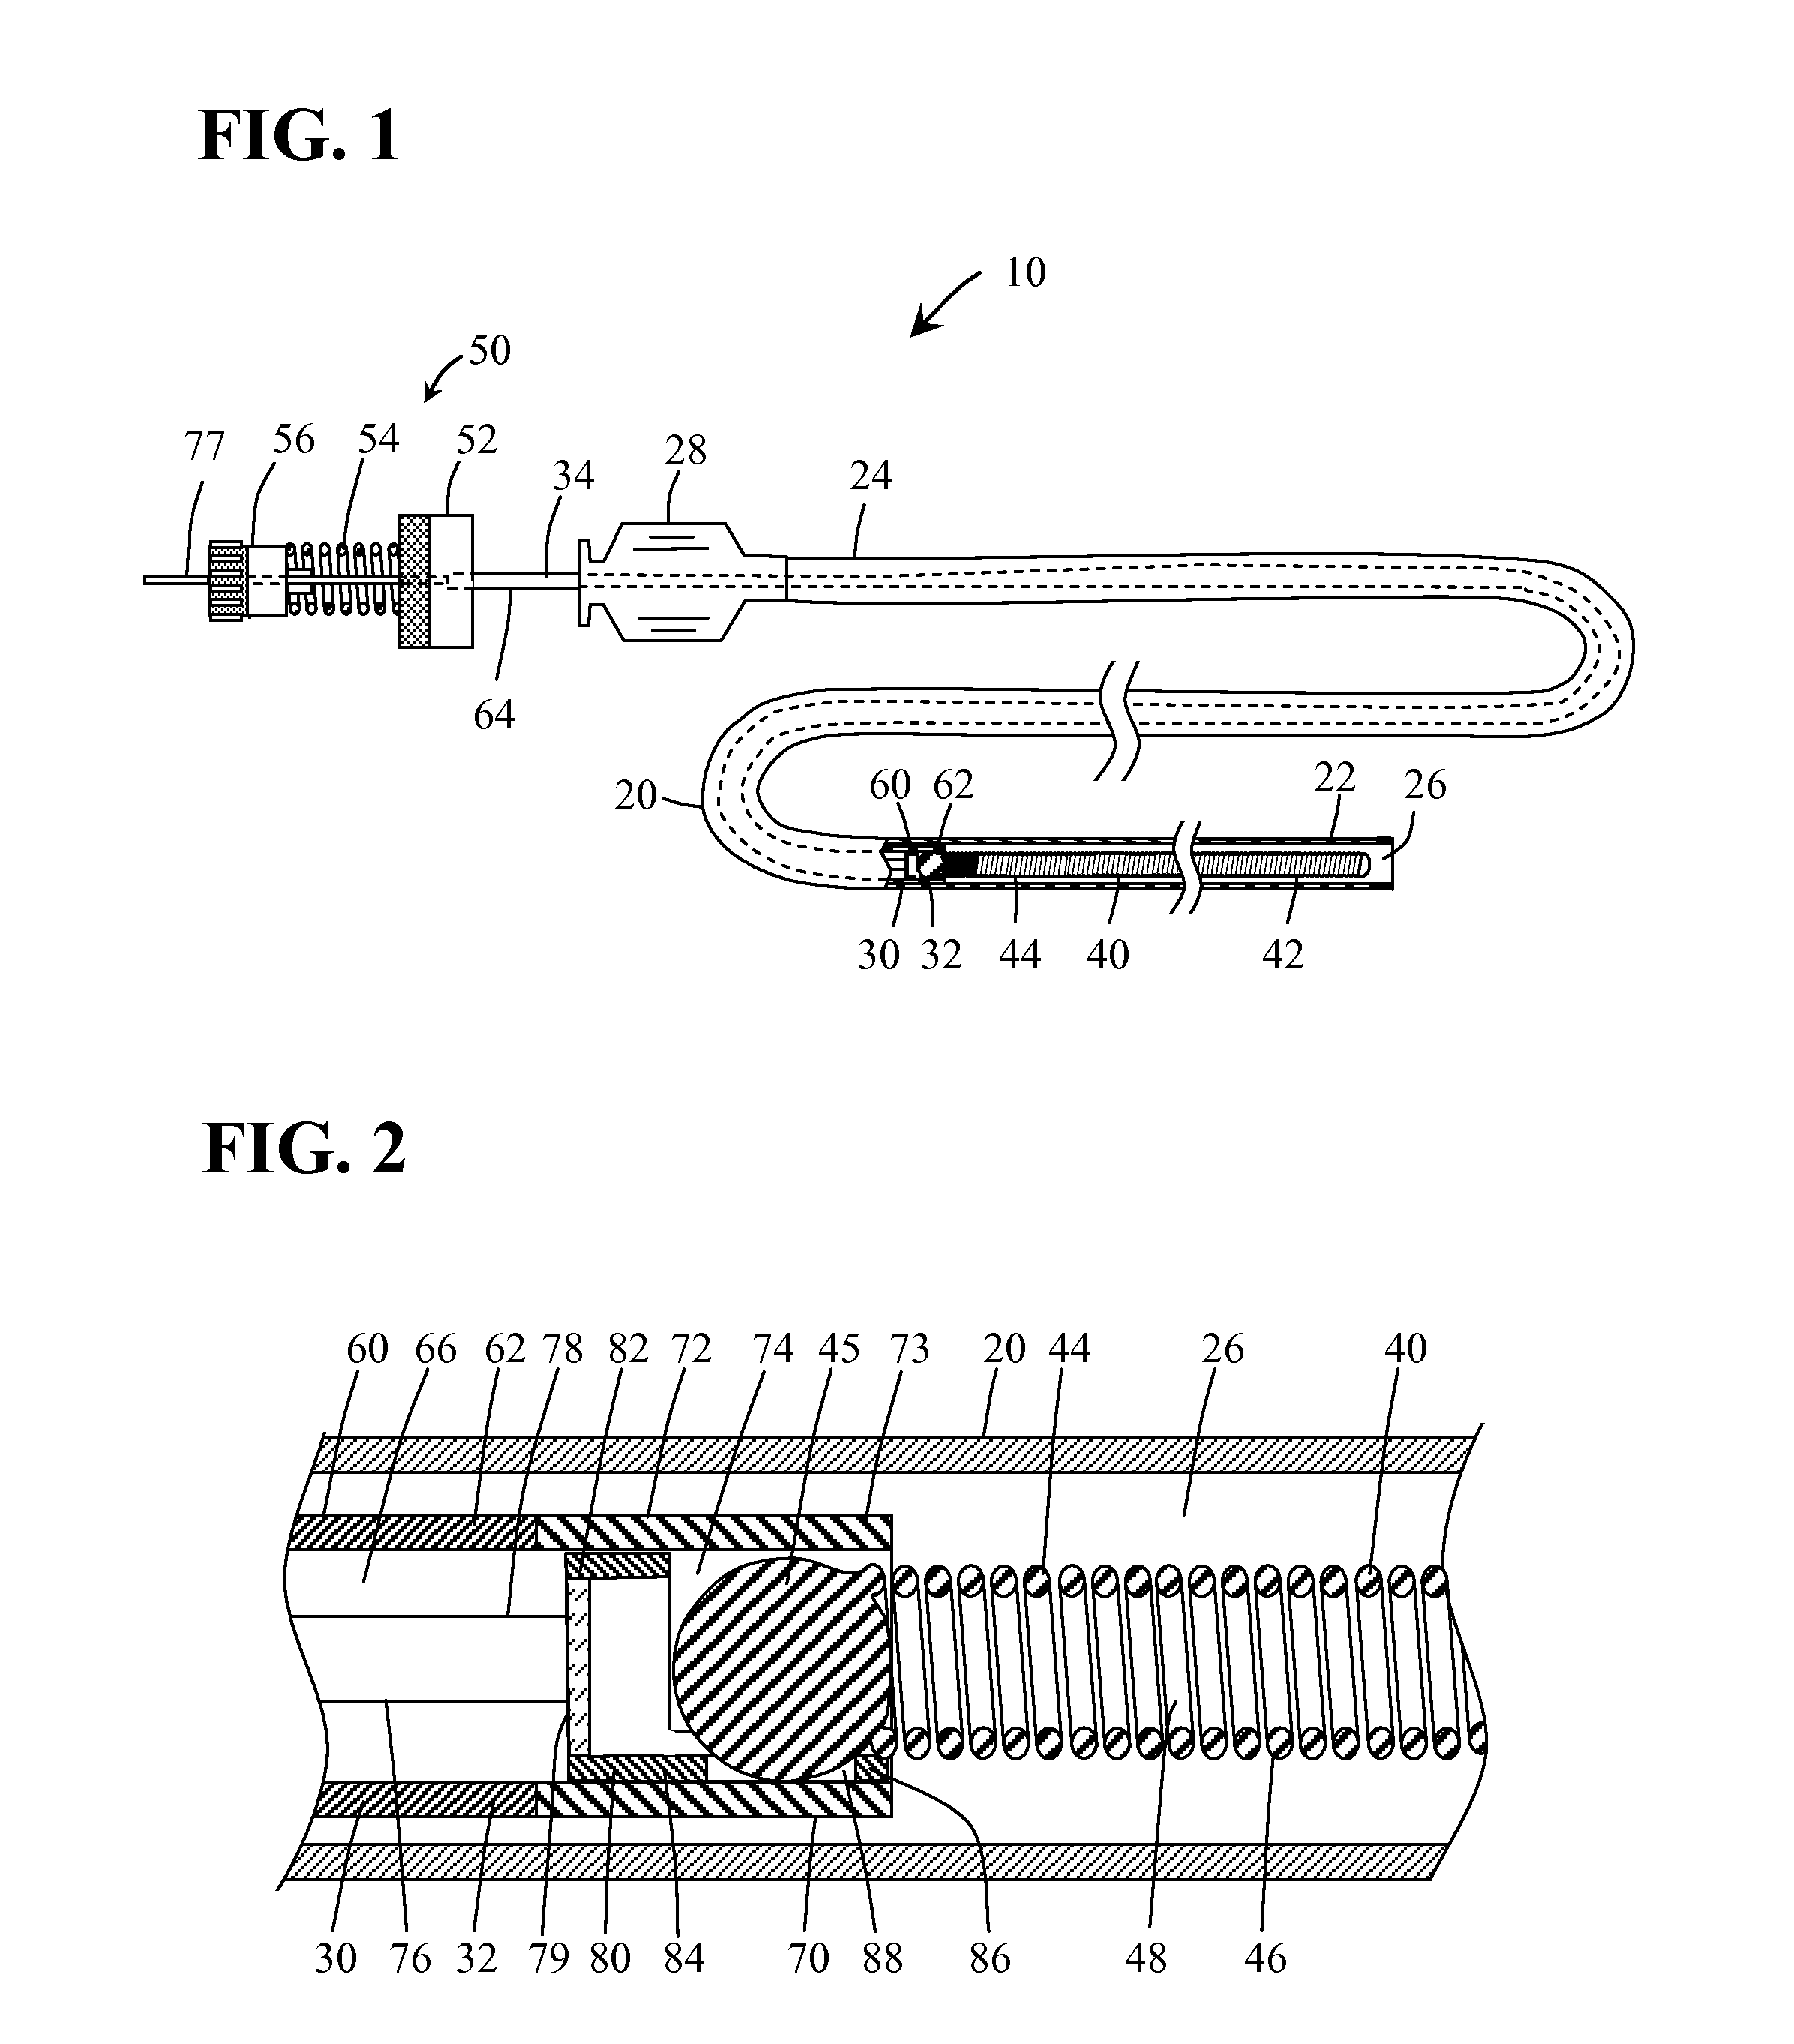 Implant delivery and release system